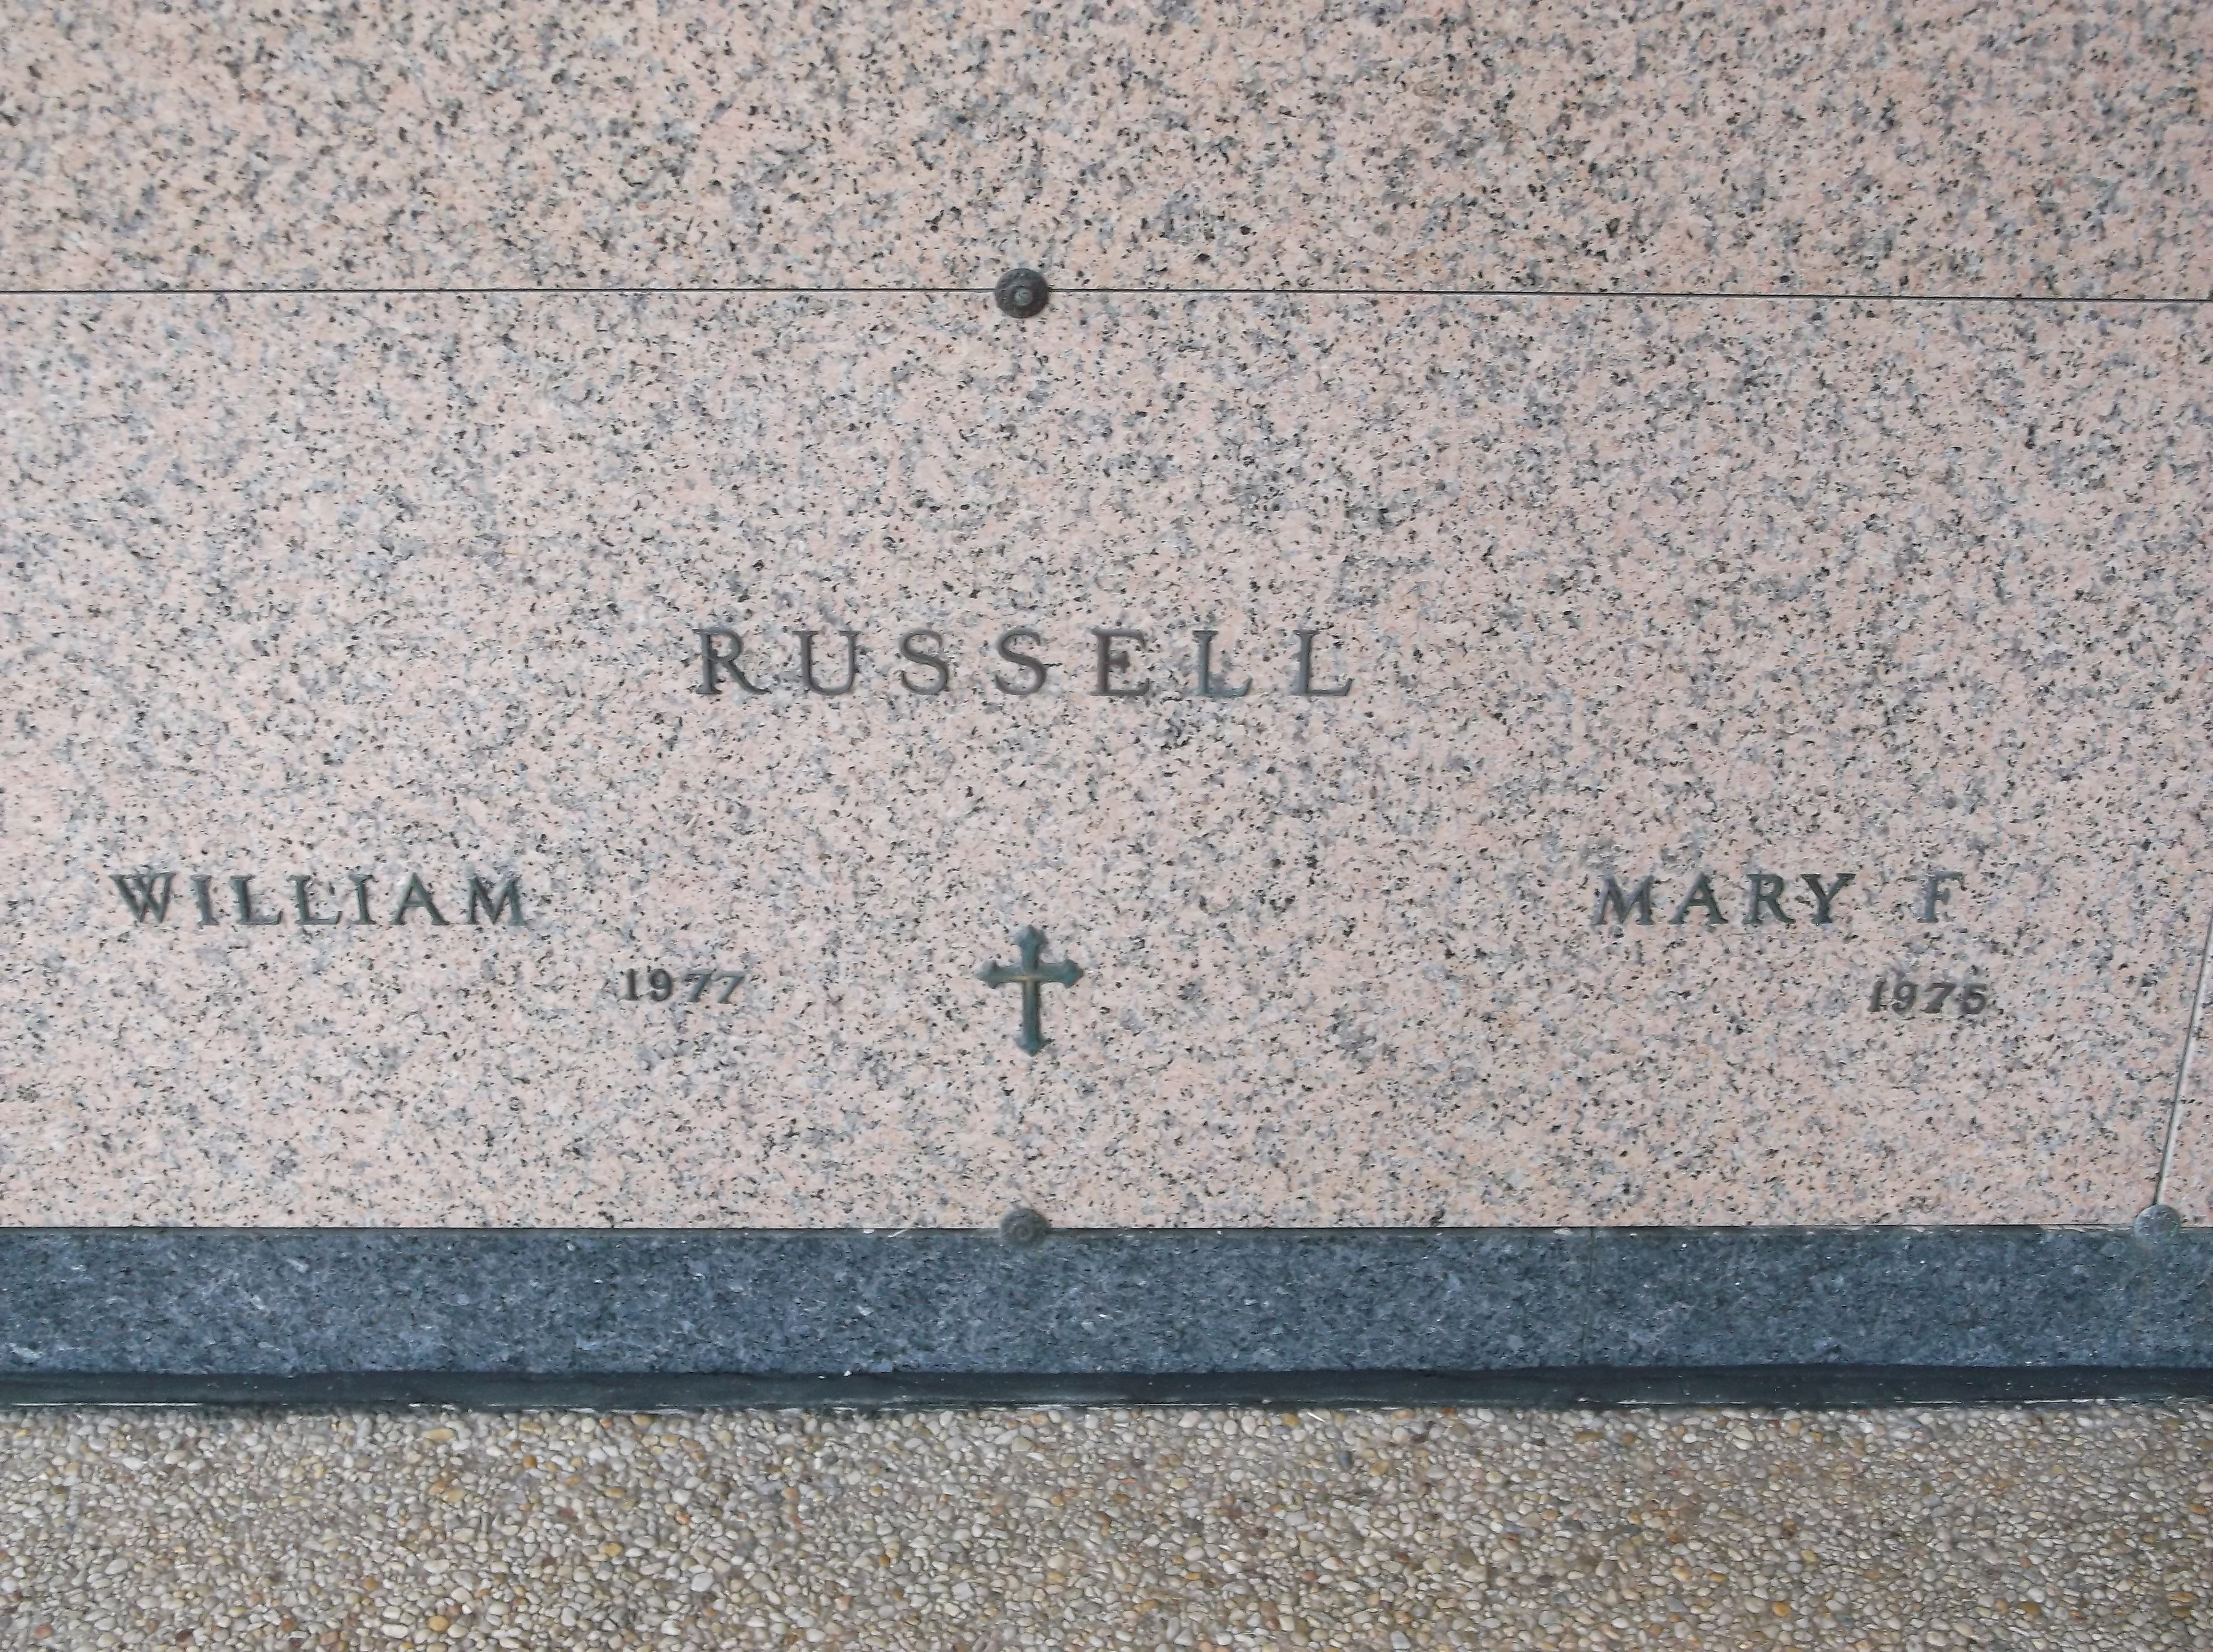 Mary F Russell